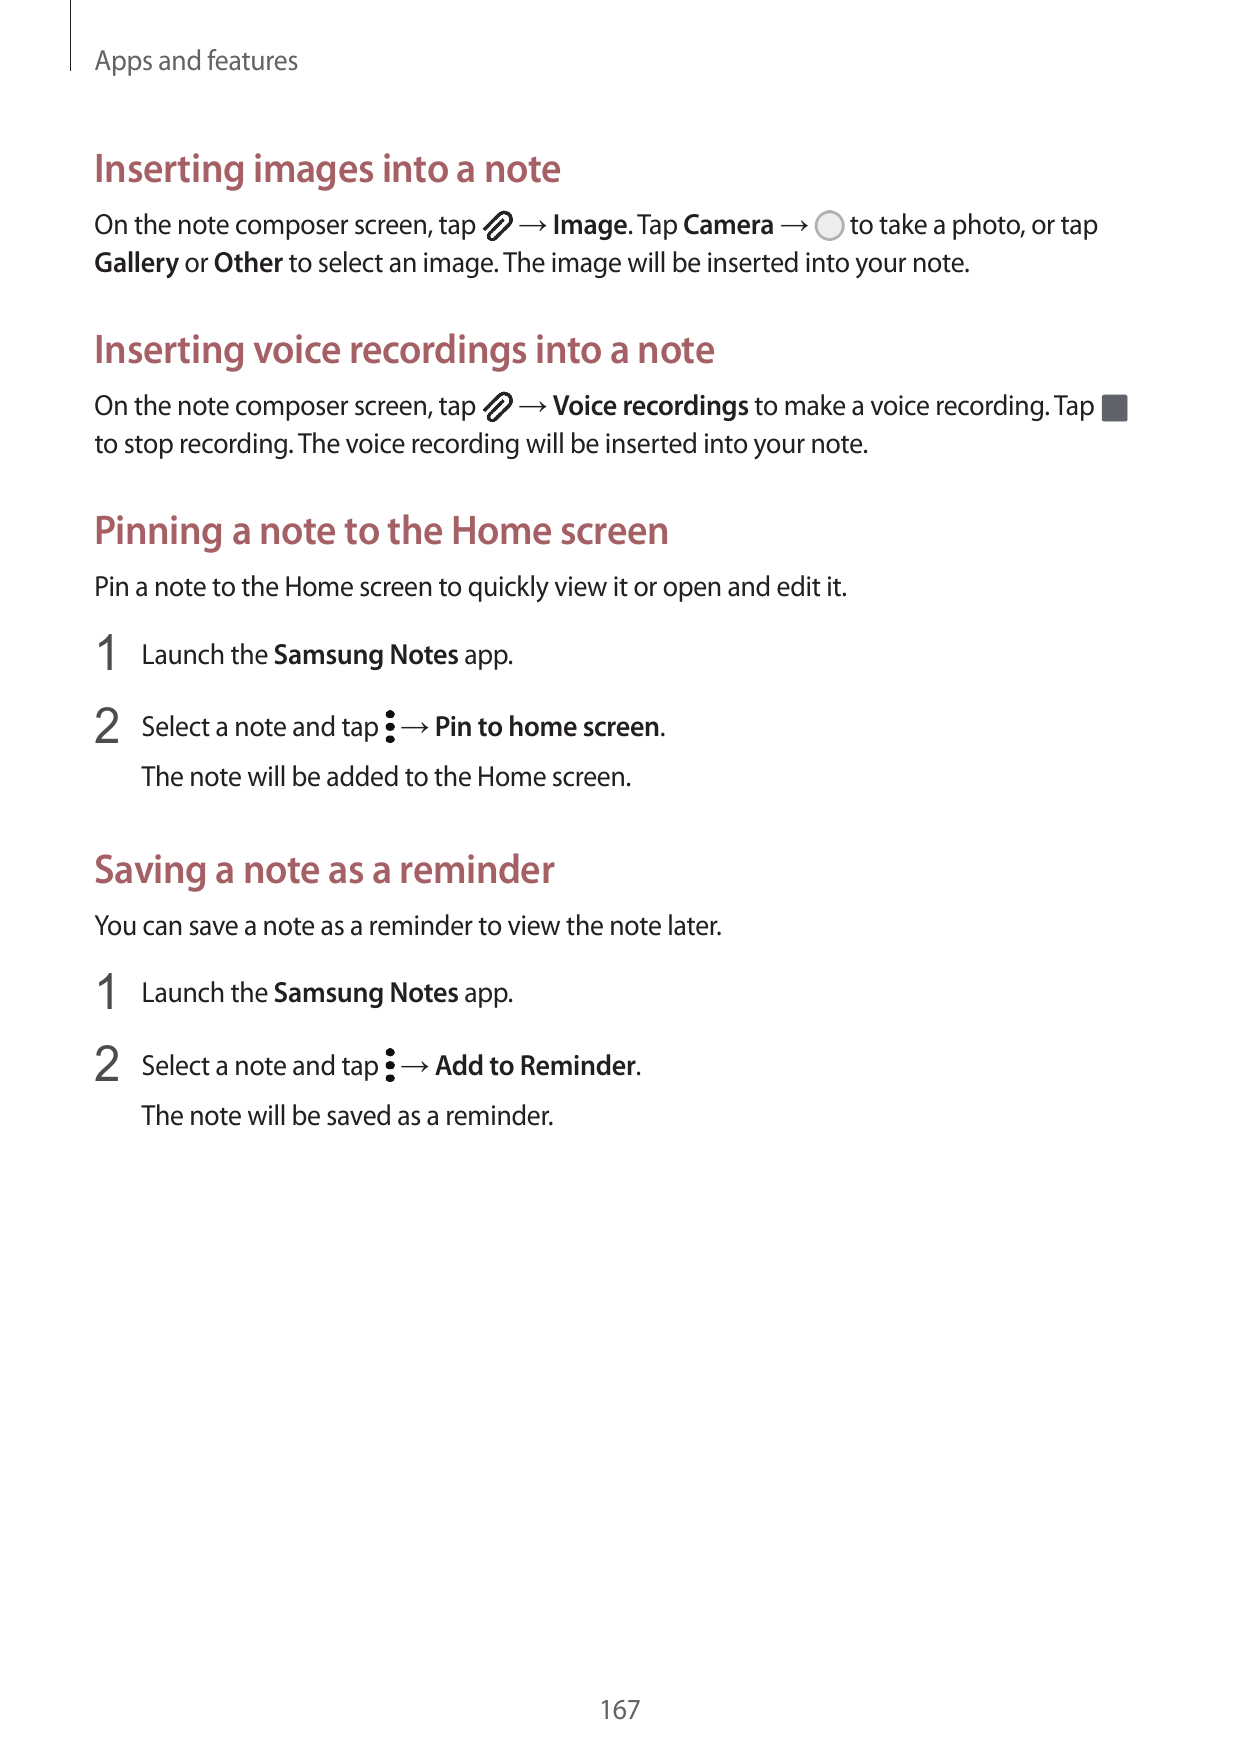 Apps and featuresInserting images into a noteOn the note composer screen, tap → Image. Tap Camera → to take a photo, or tapGalle